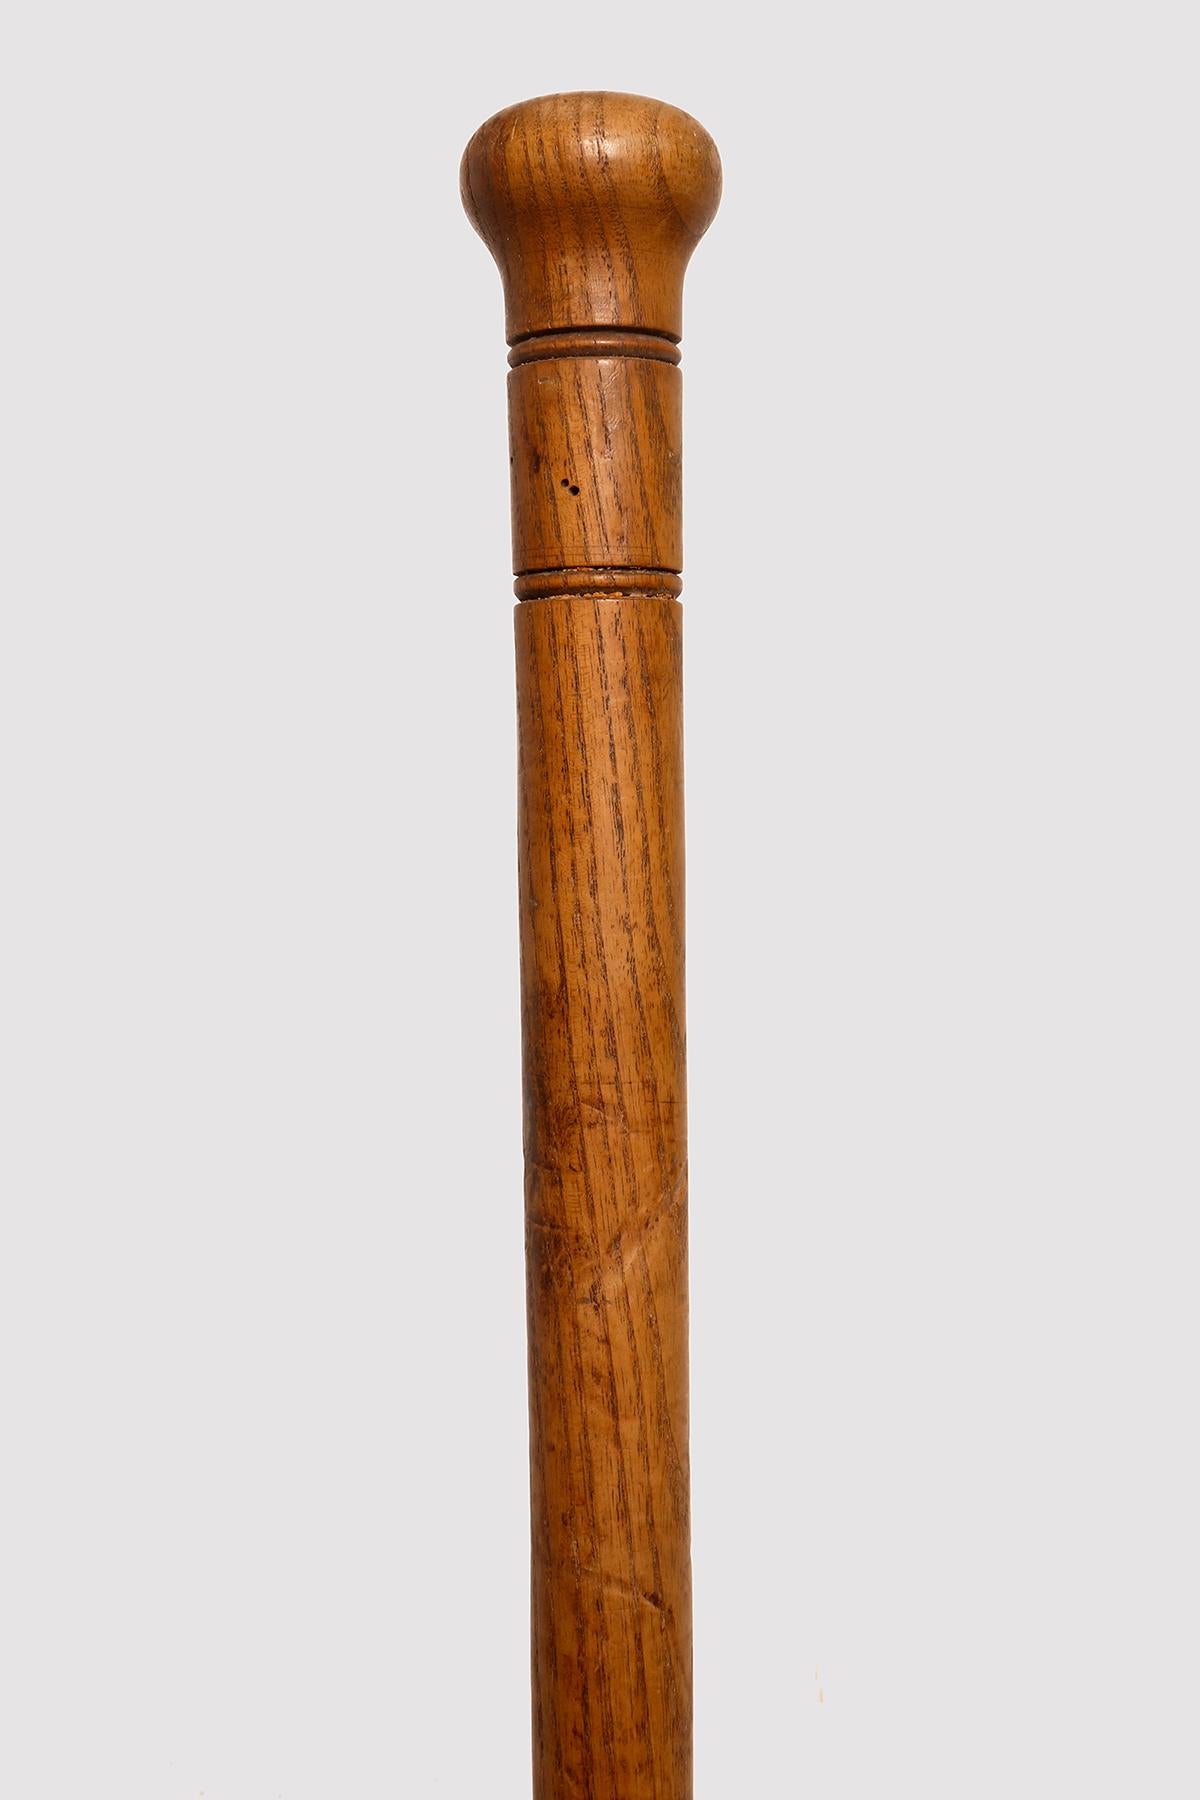 System walking stick. A Belgian walking stick to be used by a postman. The stick and the pommel are obtained from a single fruit branch. The milord pommel is decorated towards the shaft by two pairs of engraved circles. The ferrule is made of iron